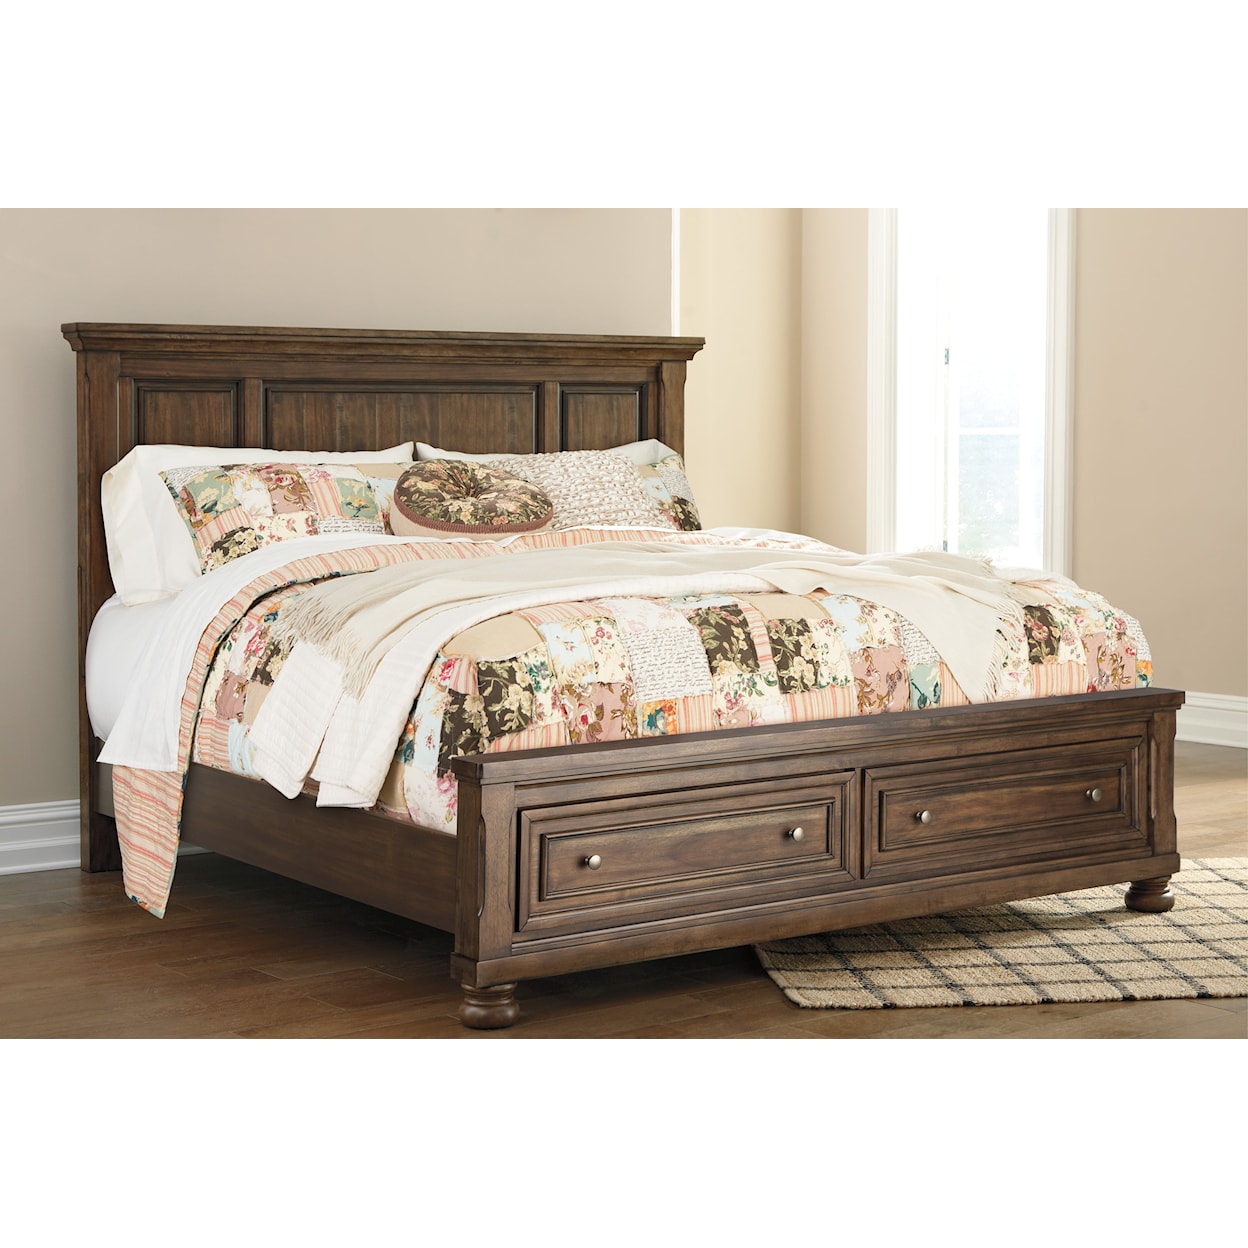 Ashley Furniture Signature Design Flynnter California King Panel Bed with Storage